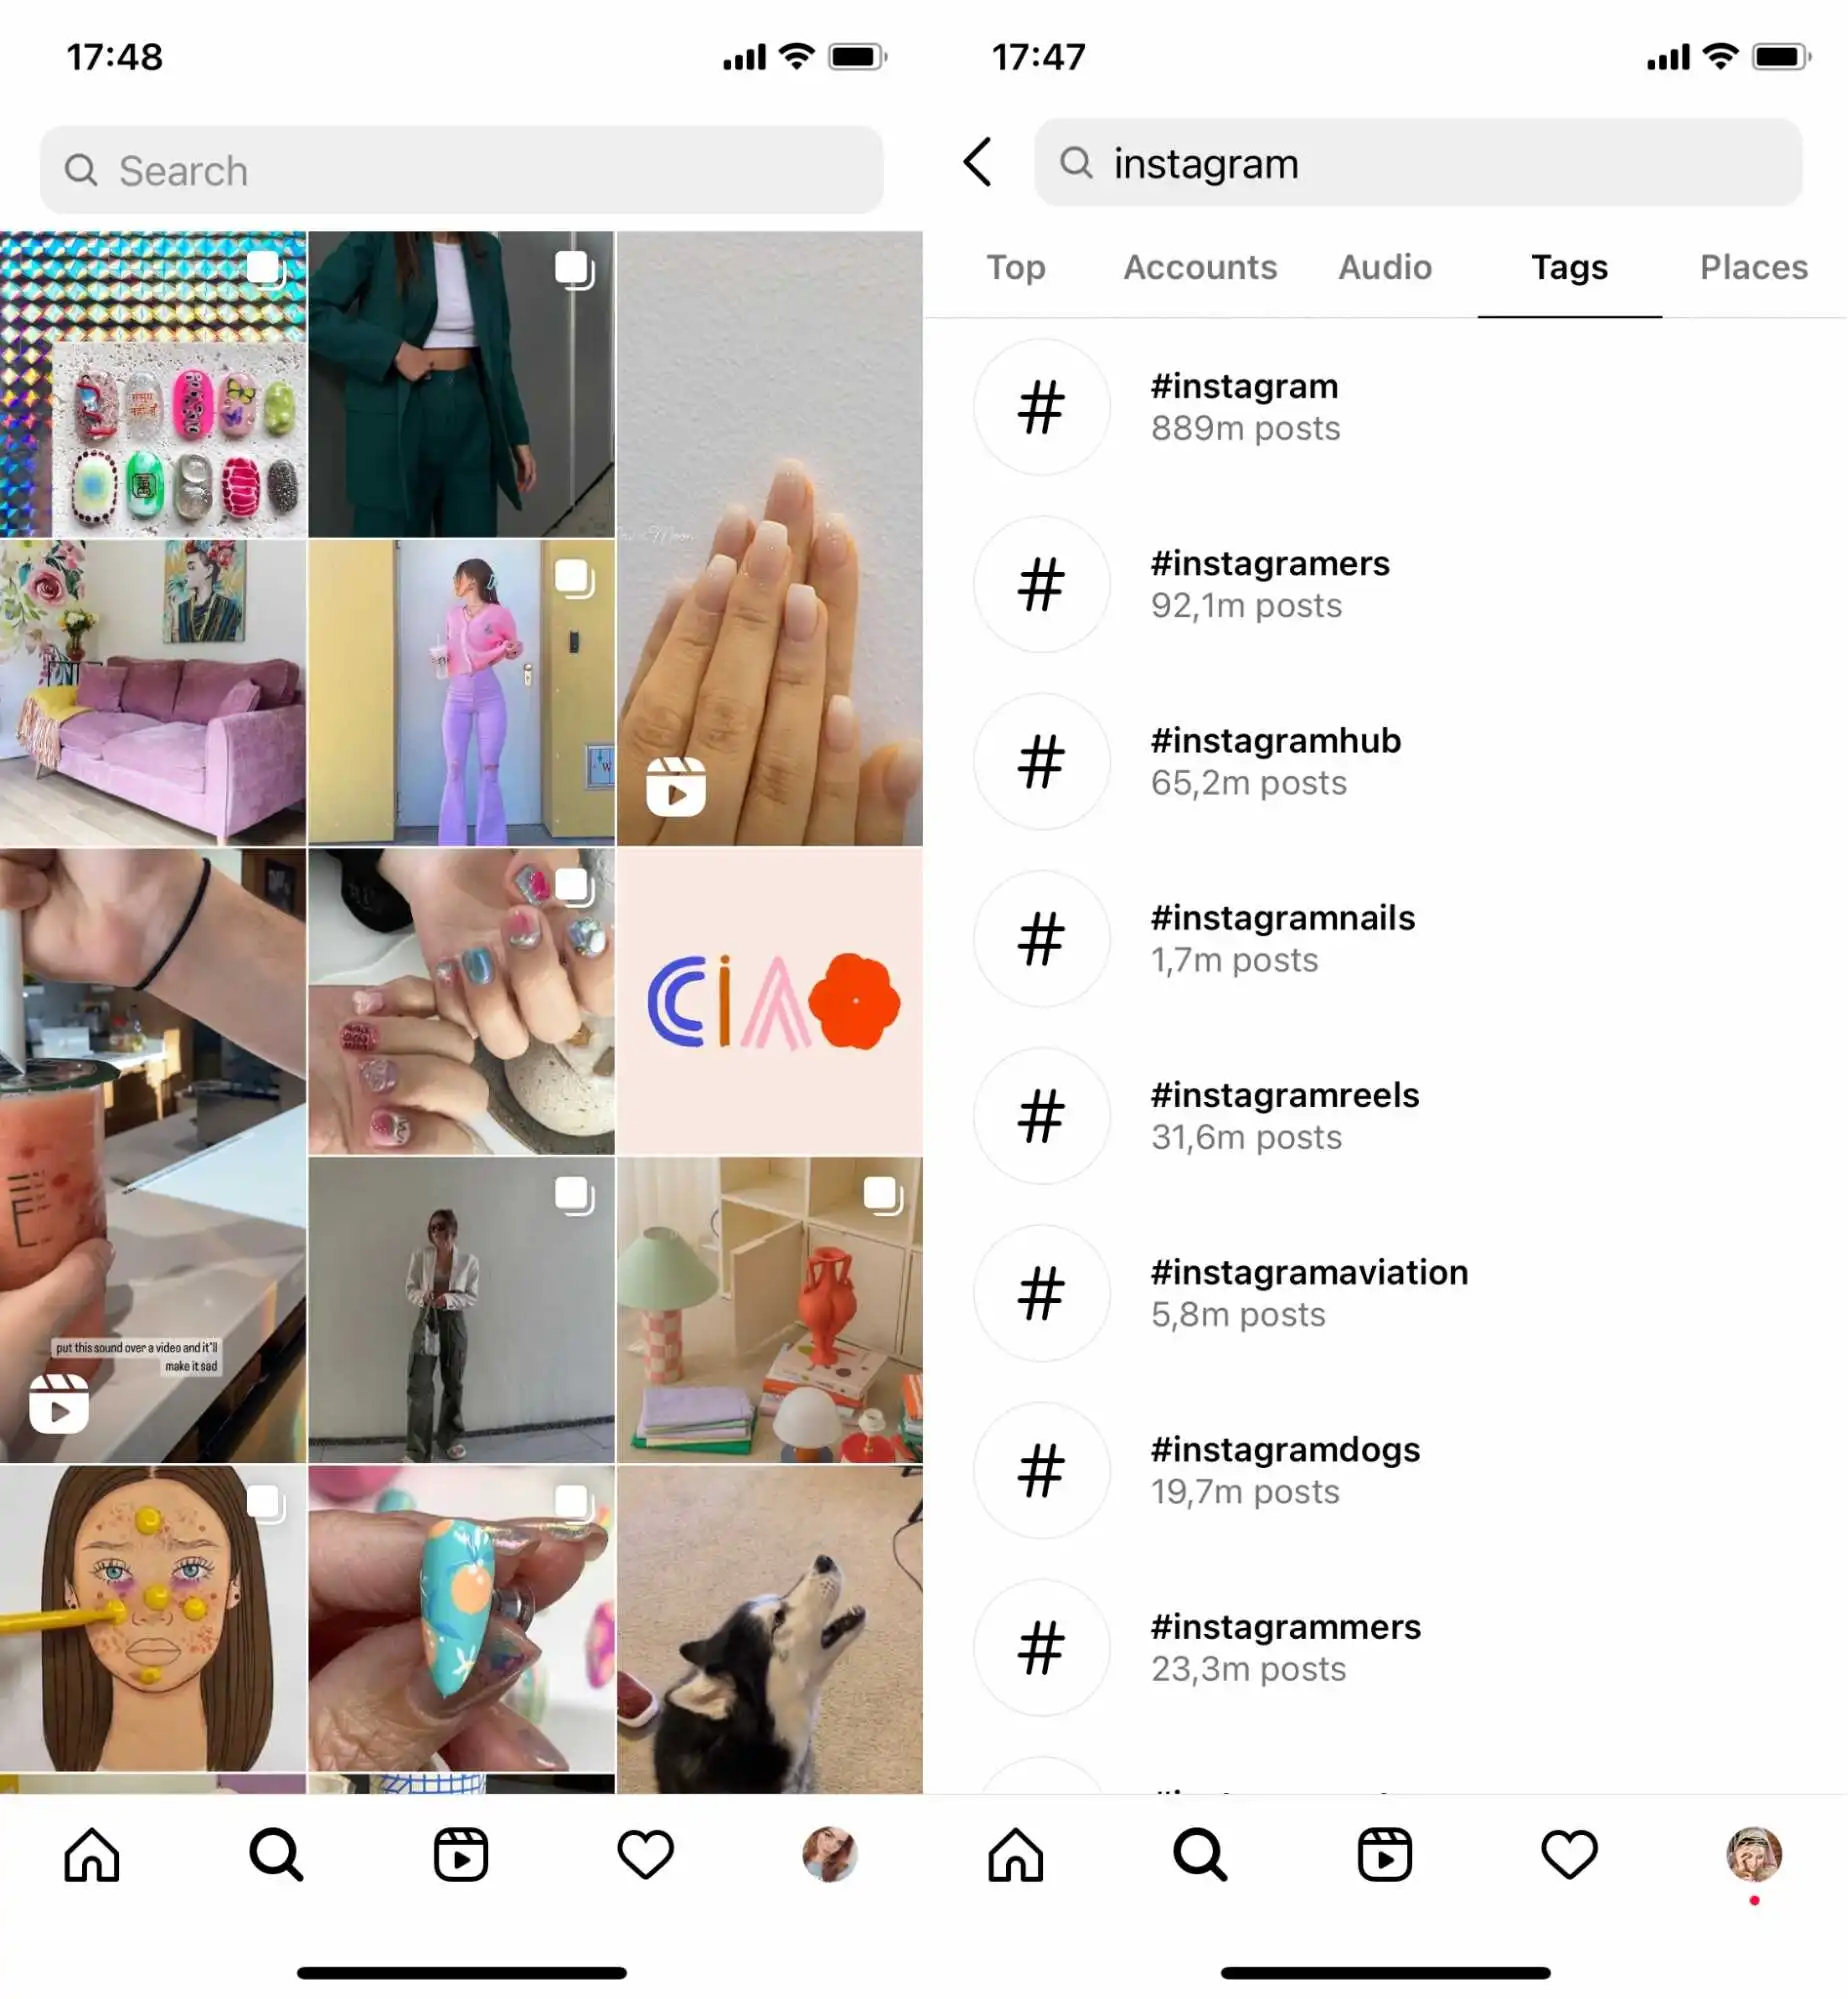 Screenshot is showing how find hashtags by searching on Instagram